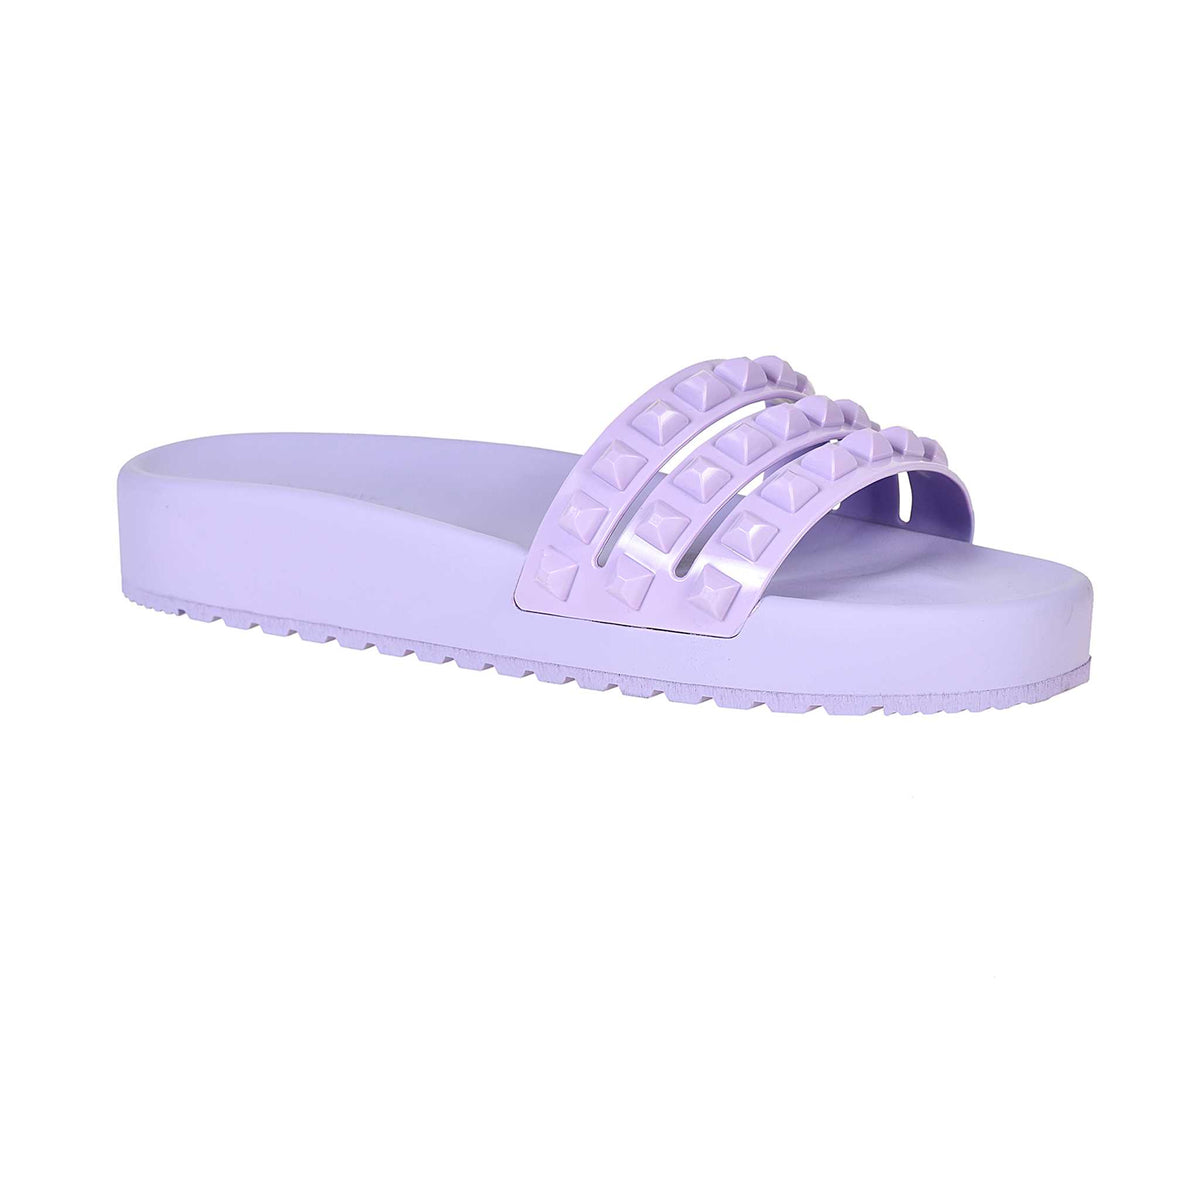 Carmen Sol studded jelly shoes in color violet 